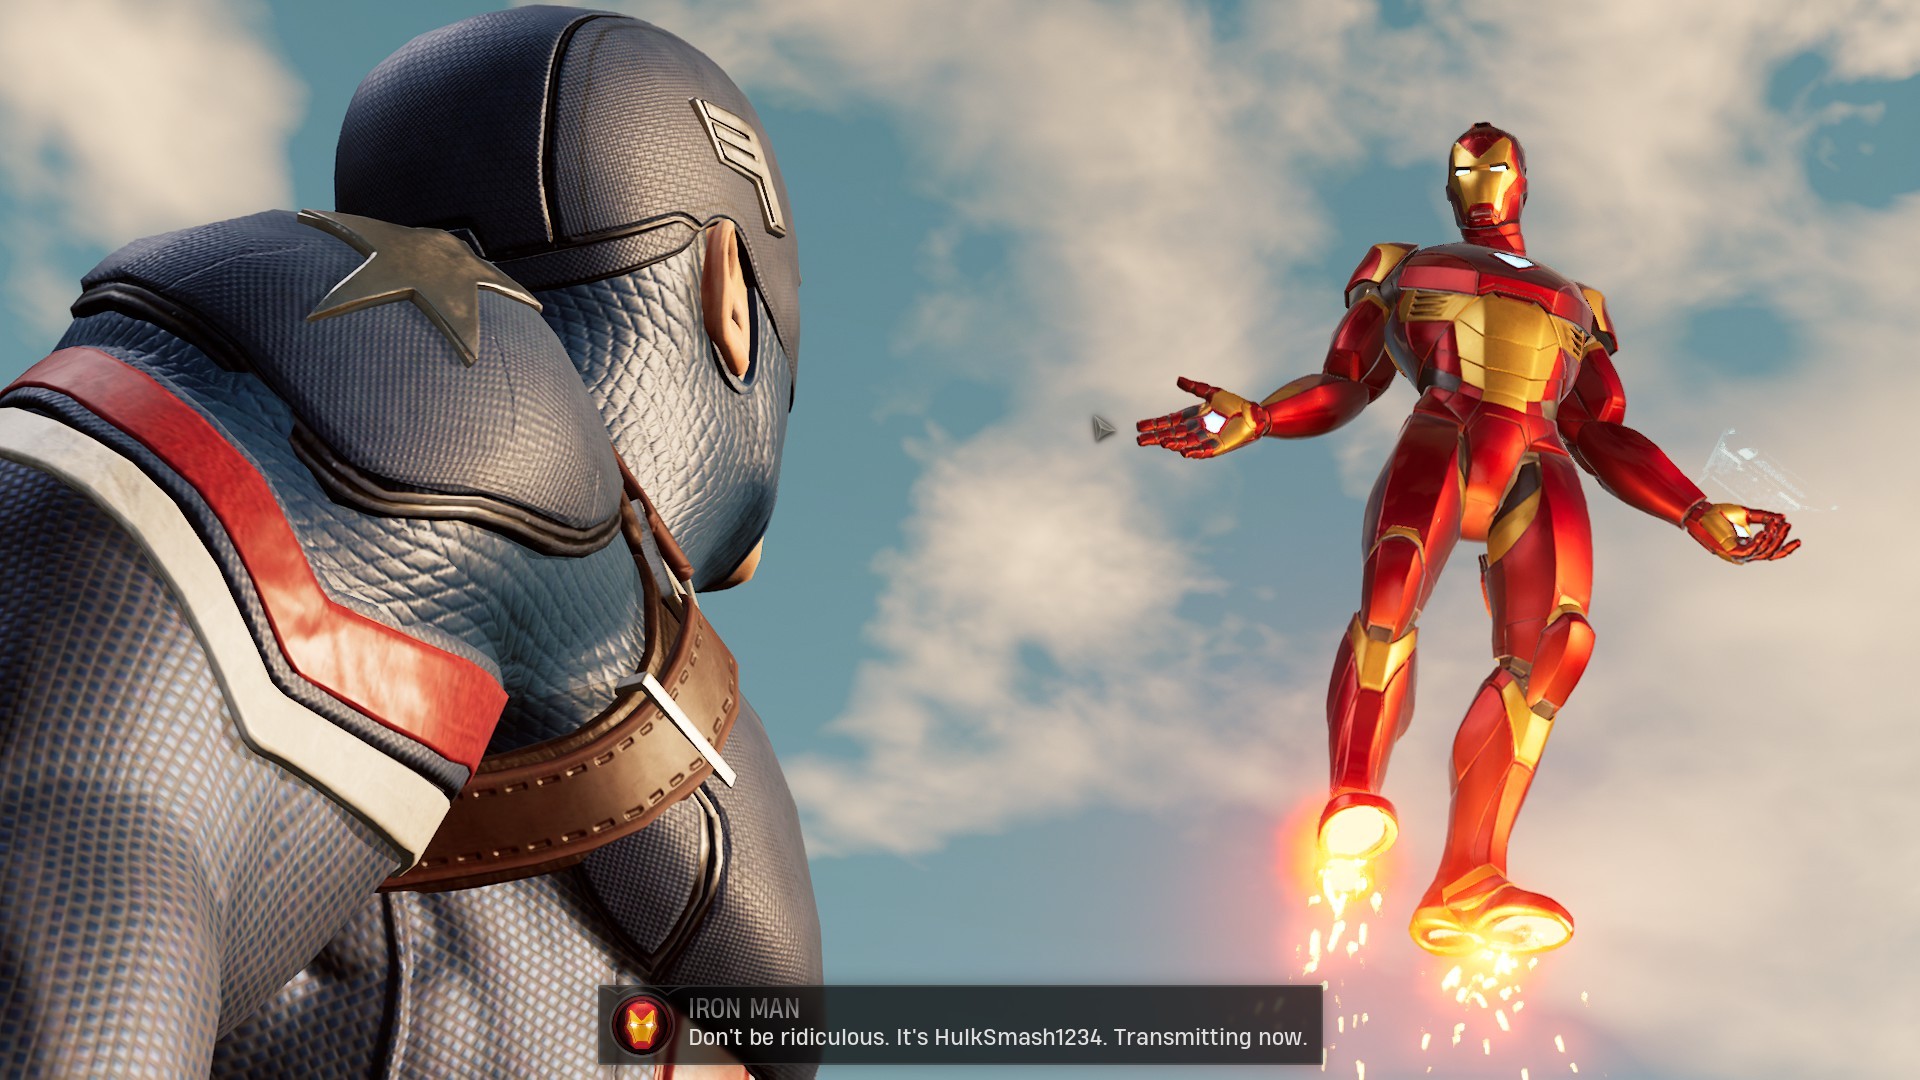 Marvel's Midnight Suns review – Firaxis working its Magik